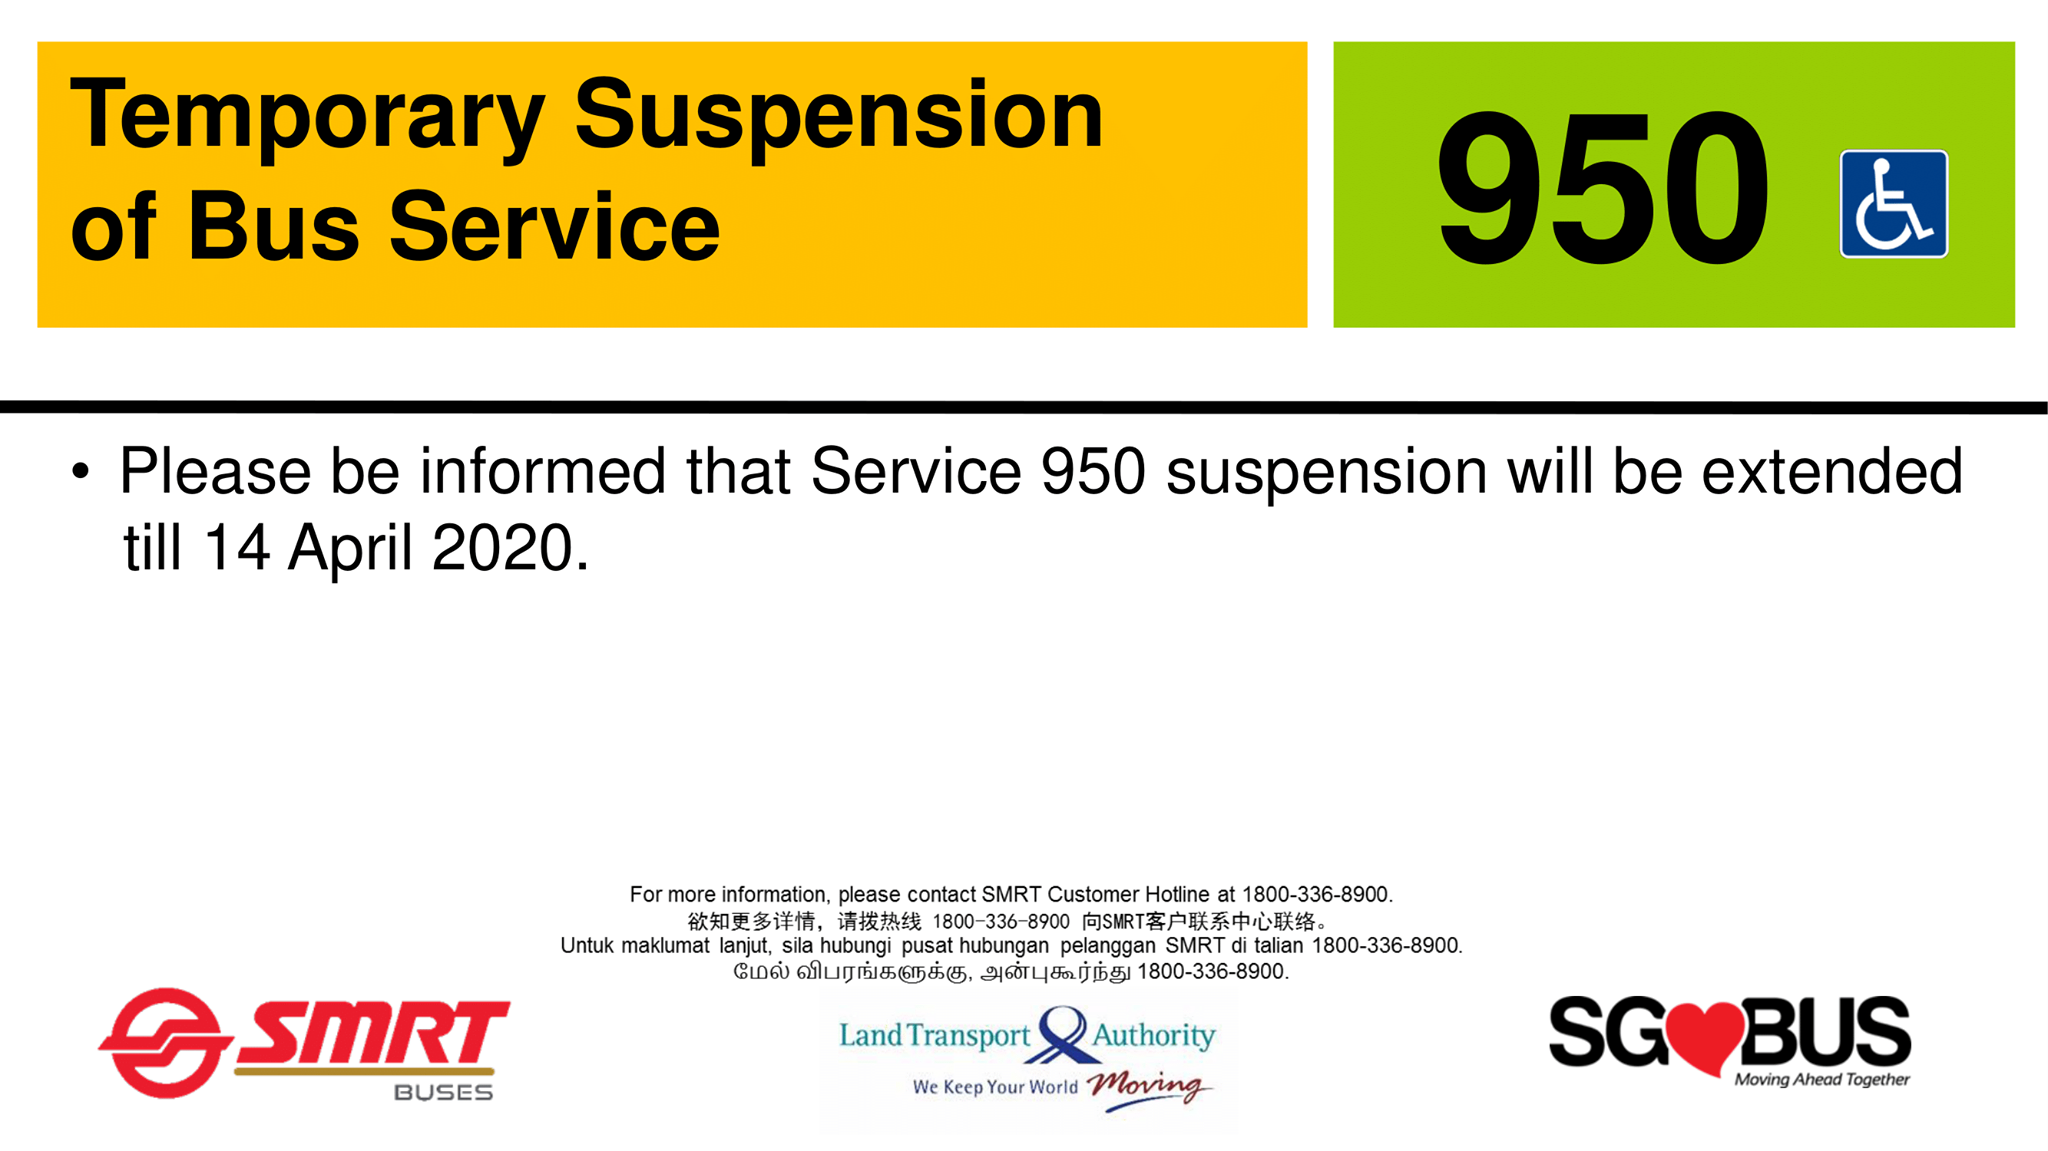 First extension on suspension to 14 April 2020 for SMRT Bus 950